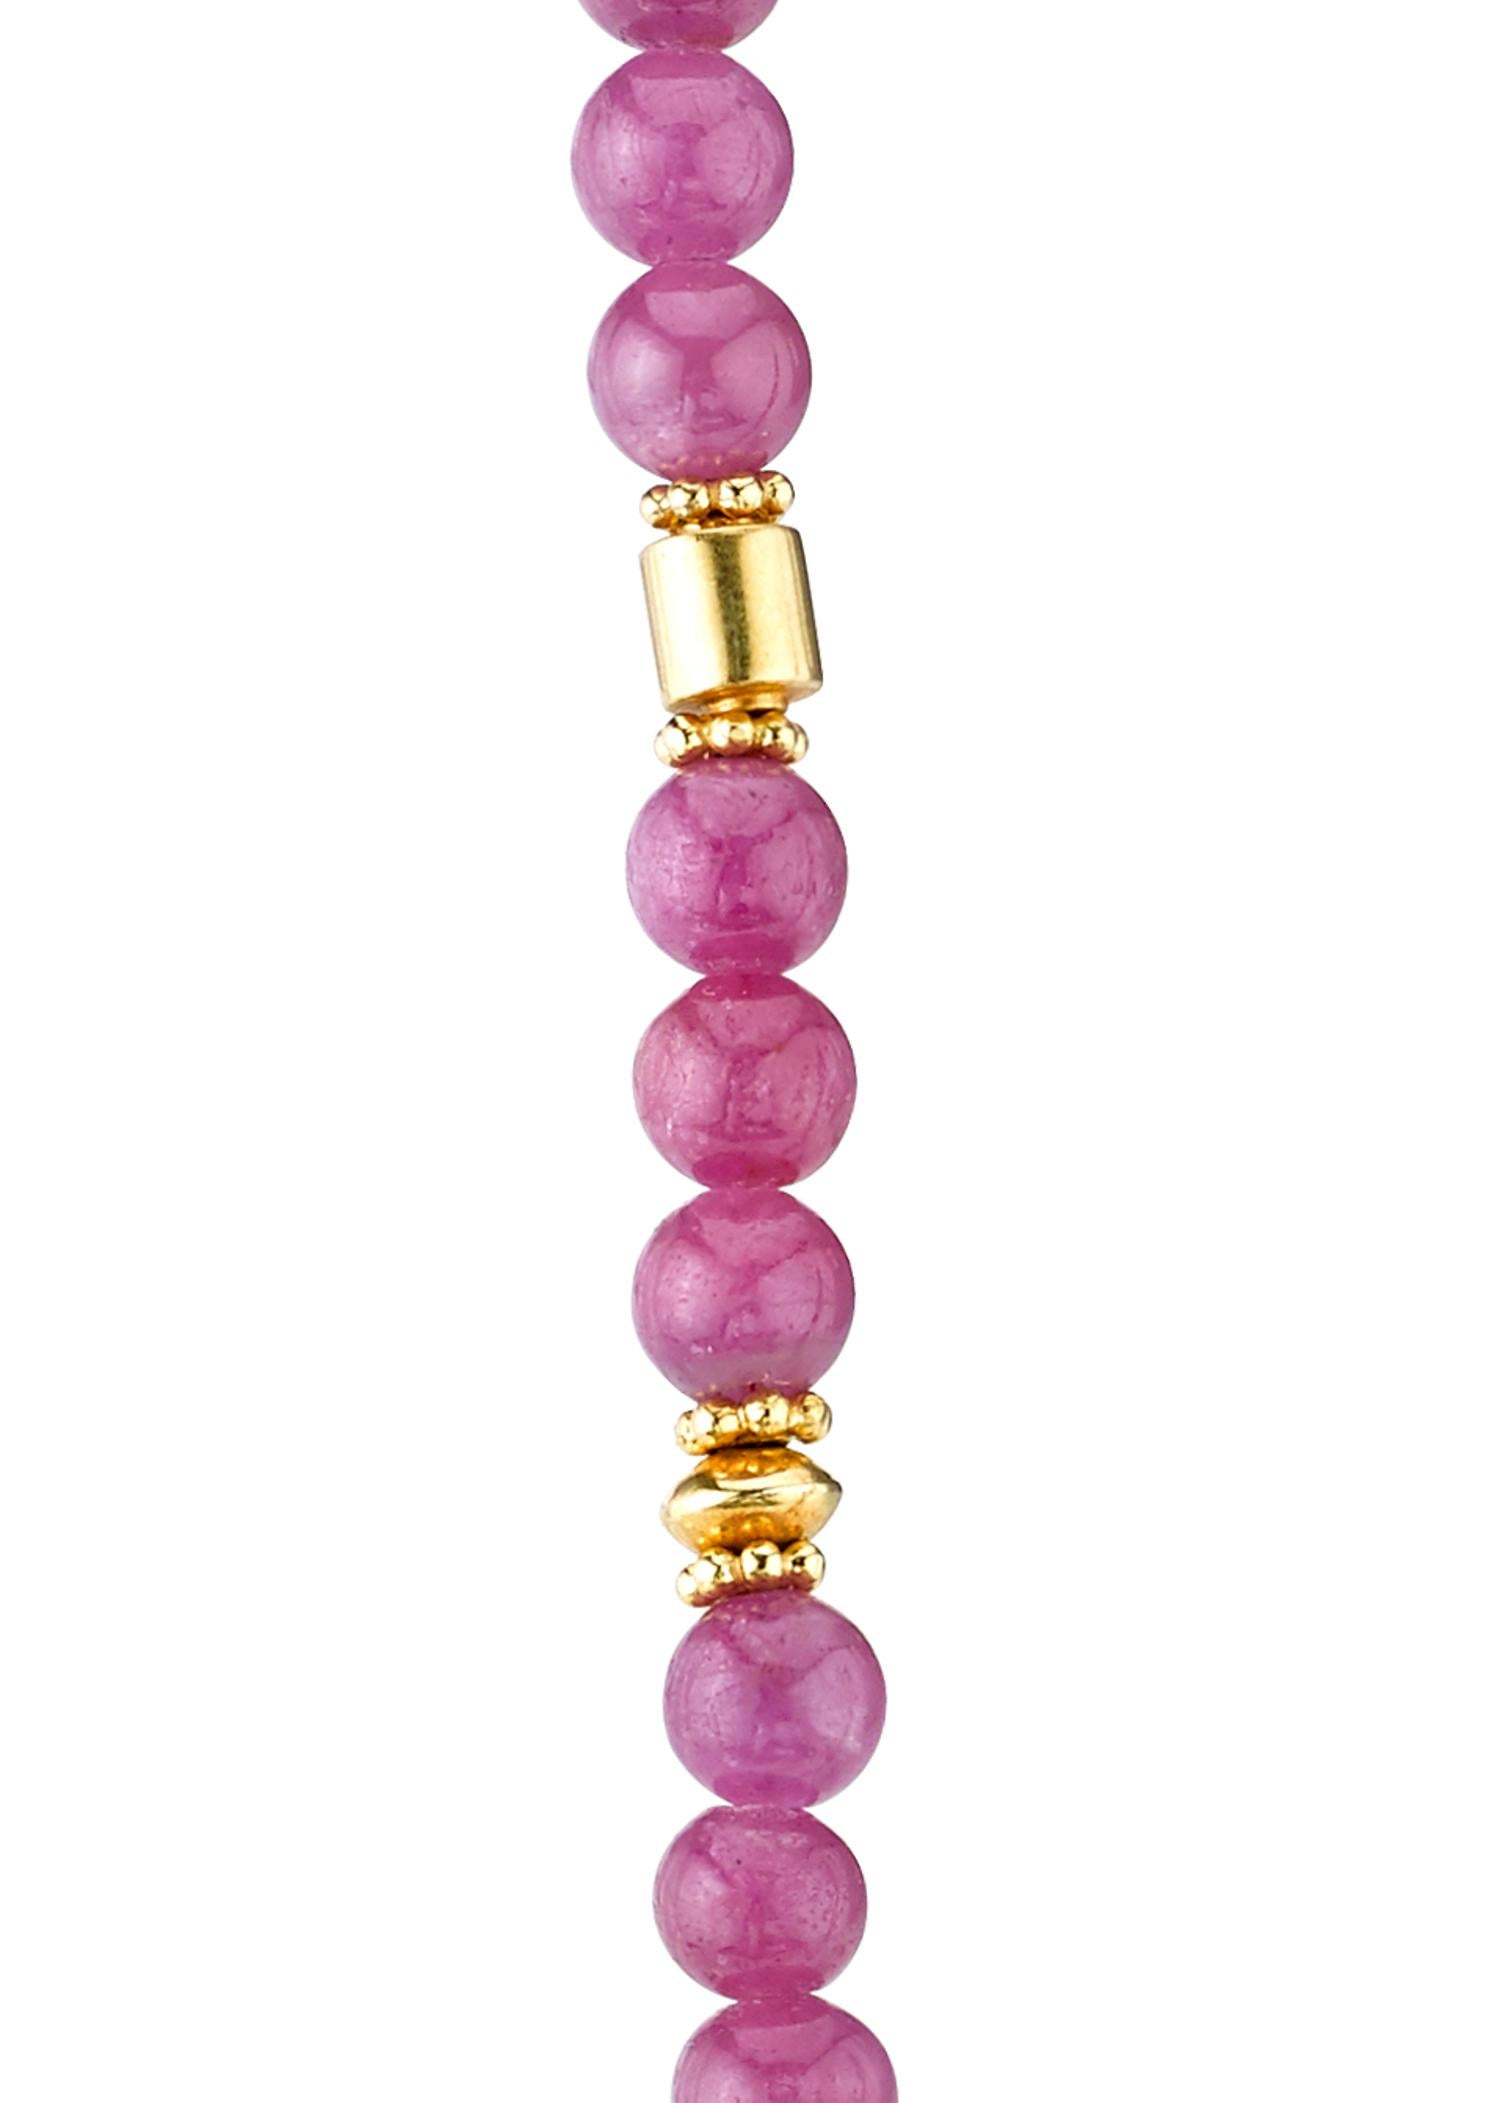 The beauty of these ruby beads cannot be denied. The 5 millimeter ruby beads are incredibly vibrant and produce strong energy to help you get though your day. The 22K yellow gold spacers elevate this piece to new heights really bringing these